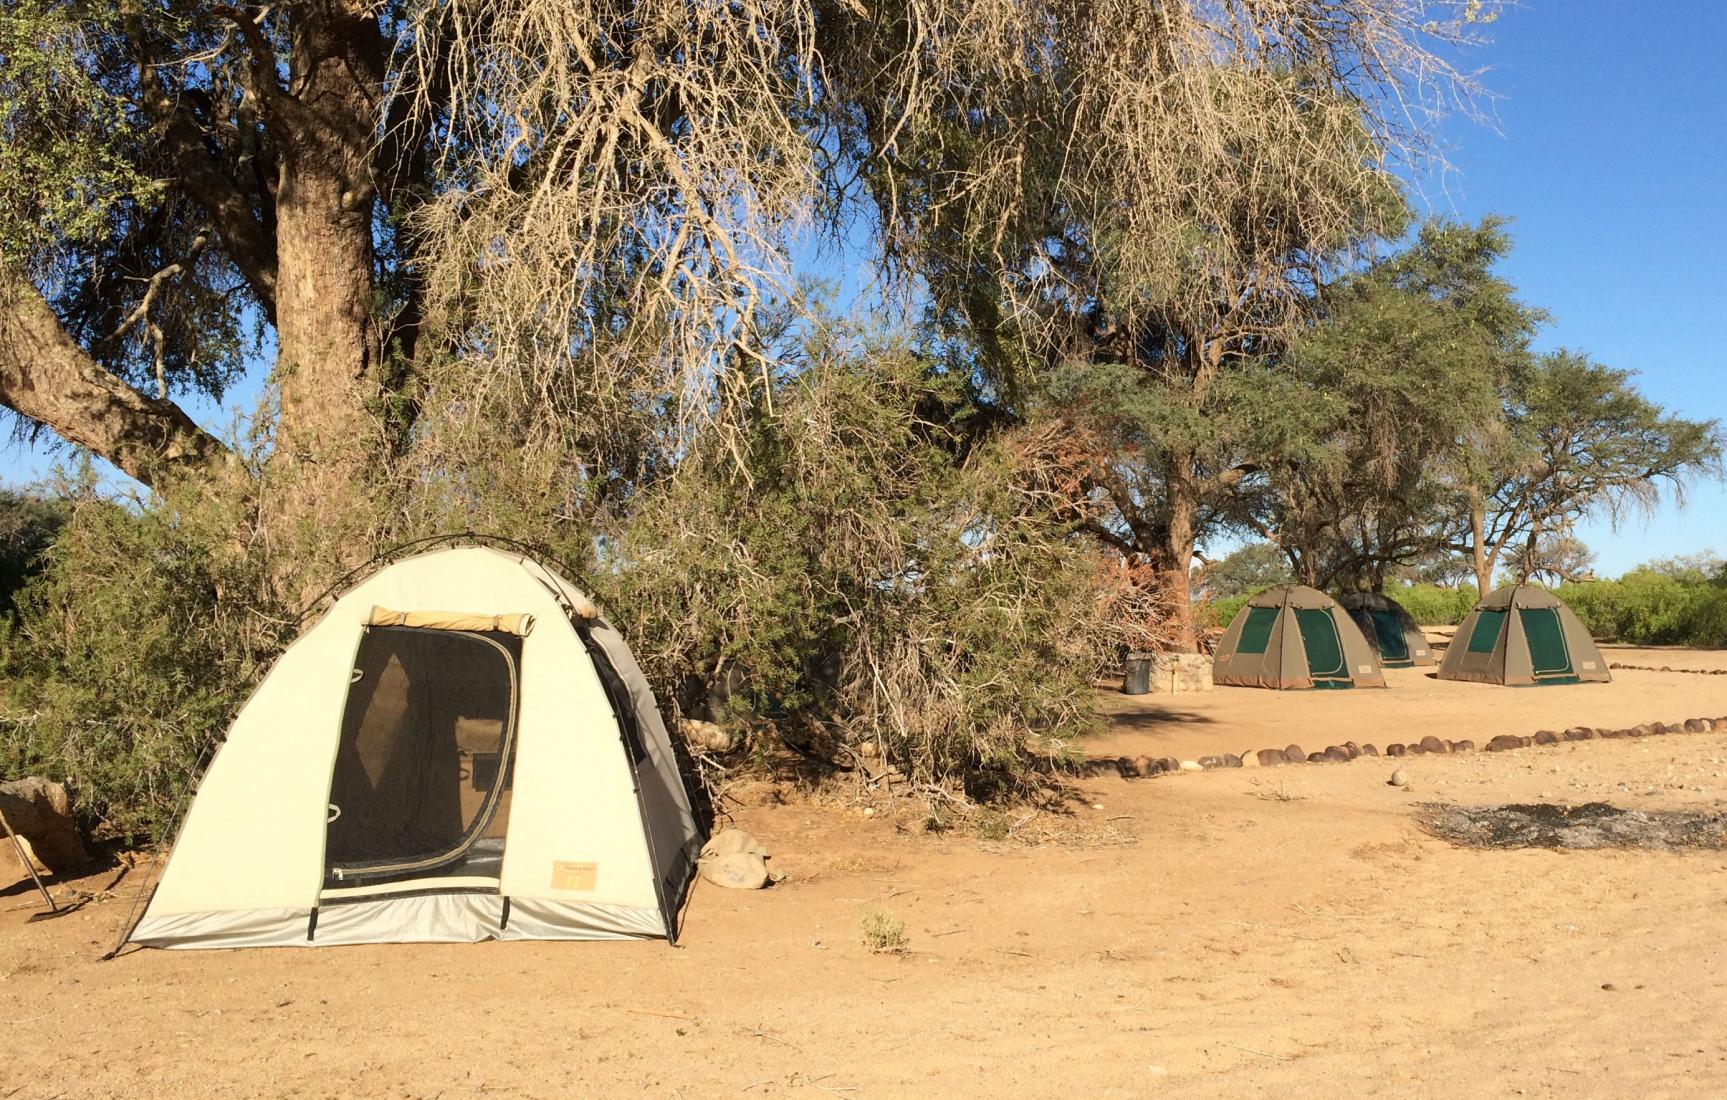 Our campsite in the Namibian desert. Photo: Tonya Fitzpatrick